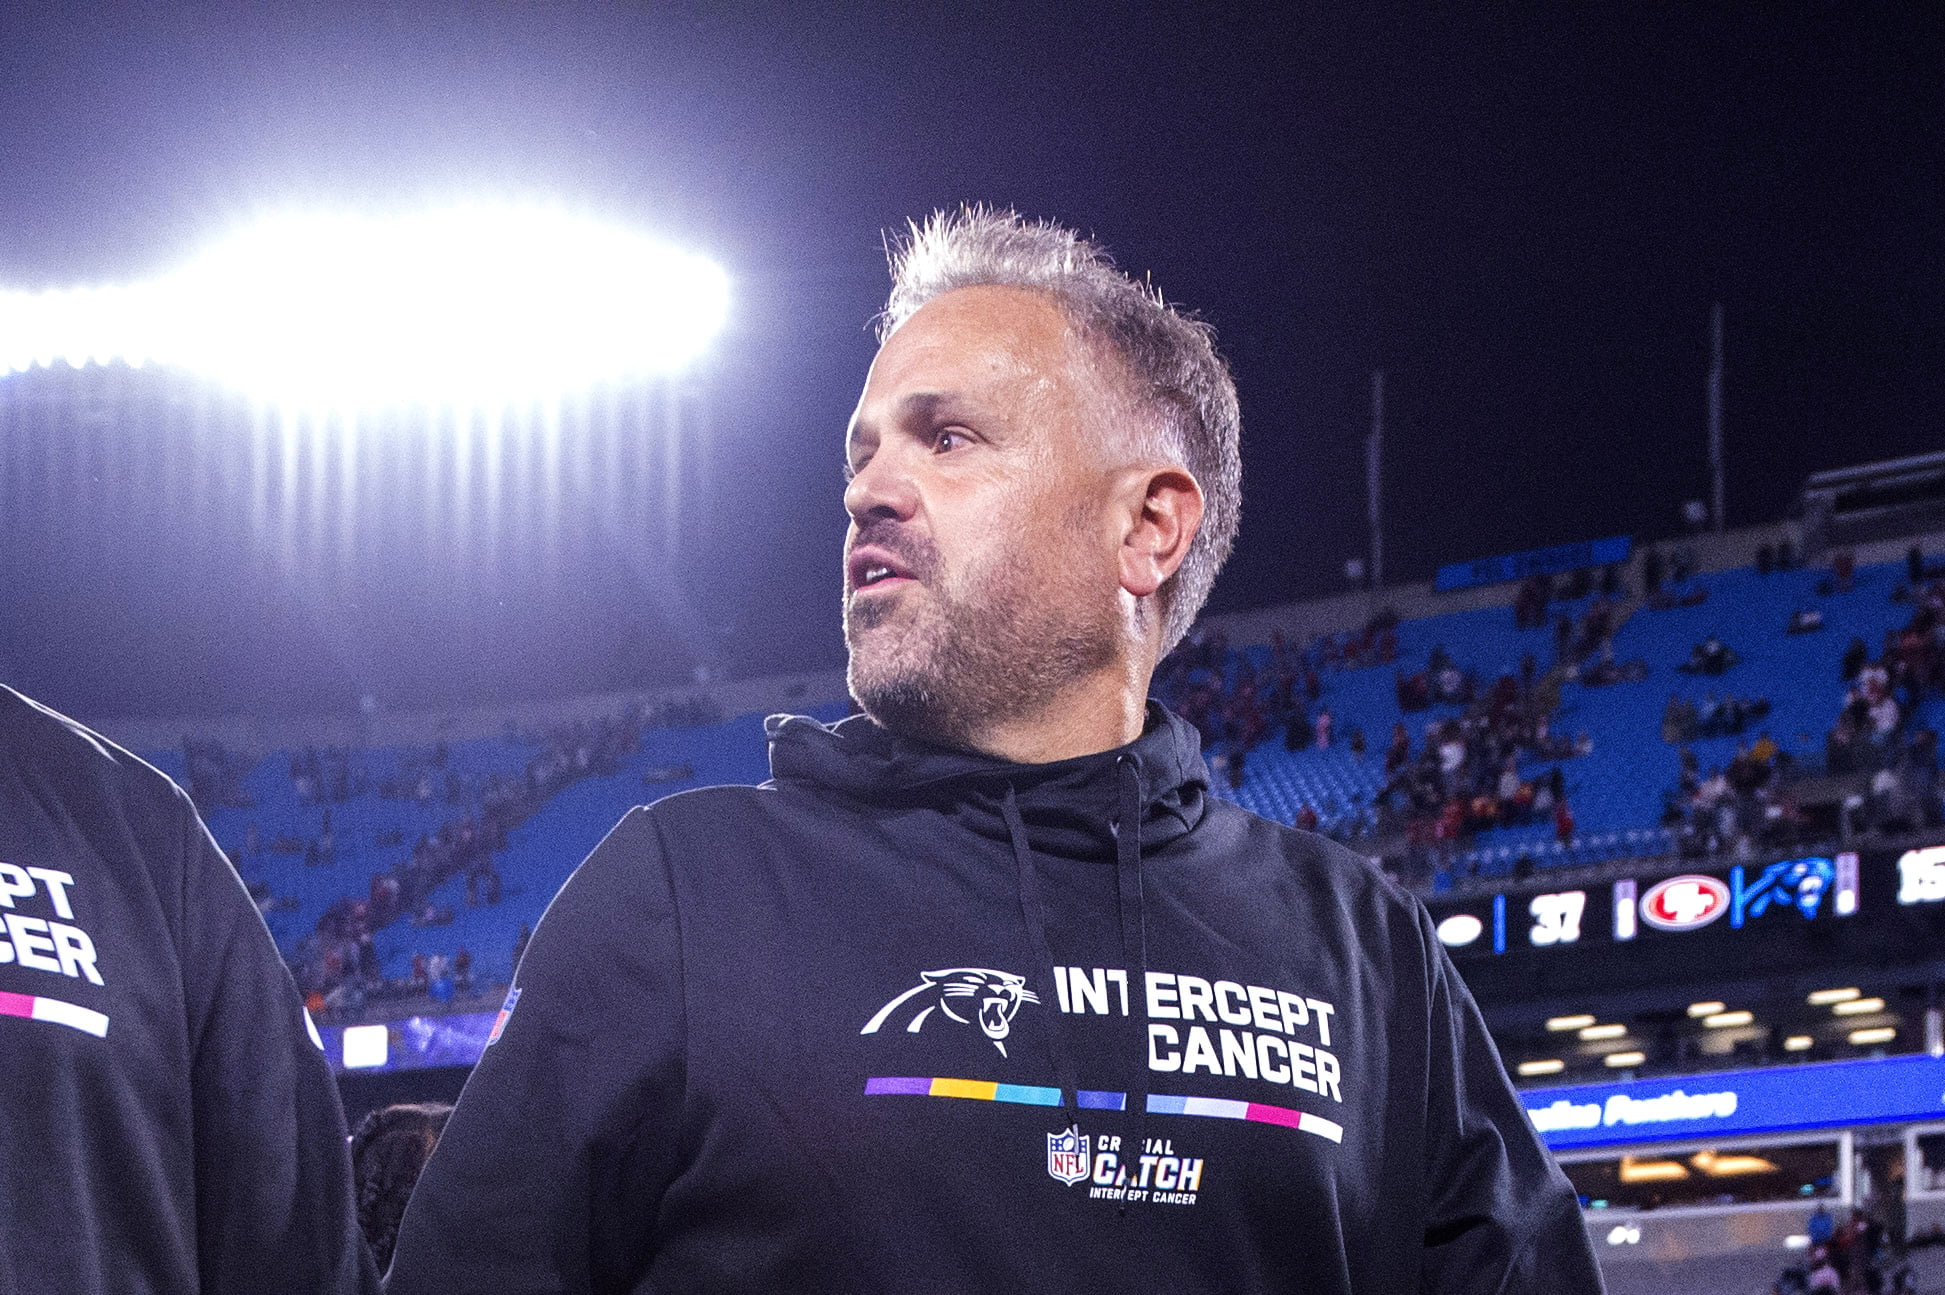 NFL coaches fired: Matt Rhule becomes first NFL coach fired in 2022